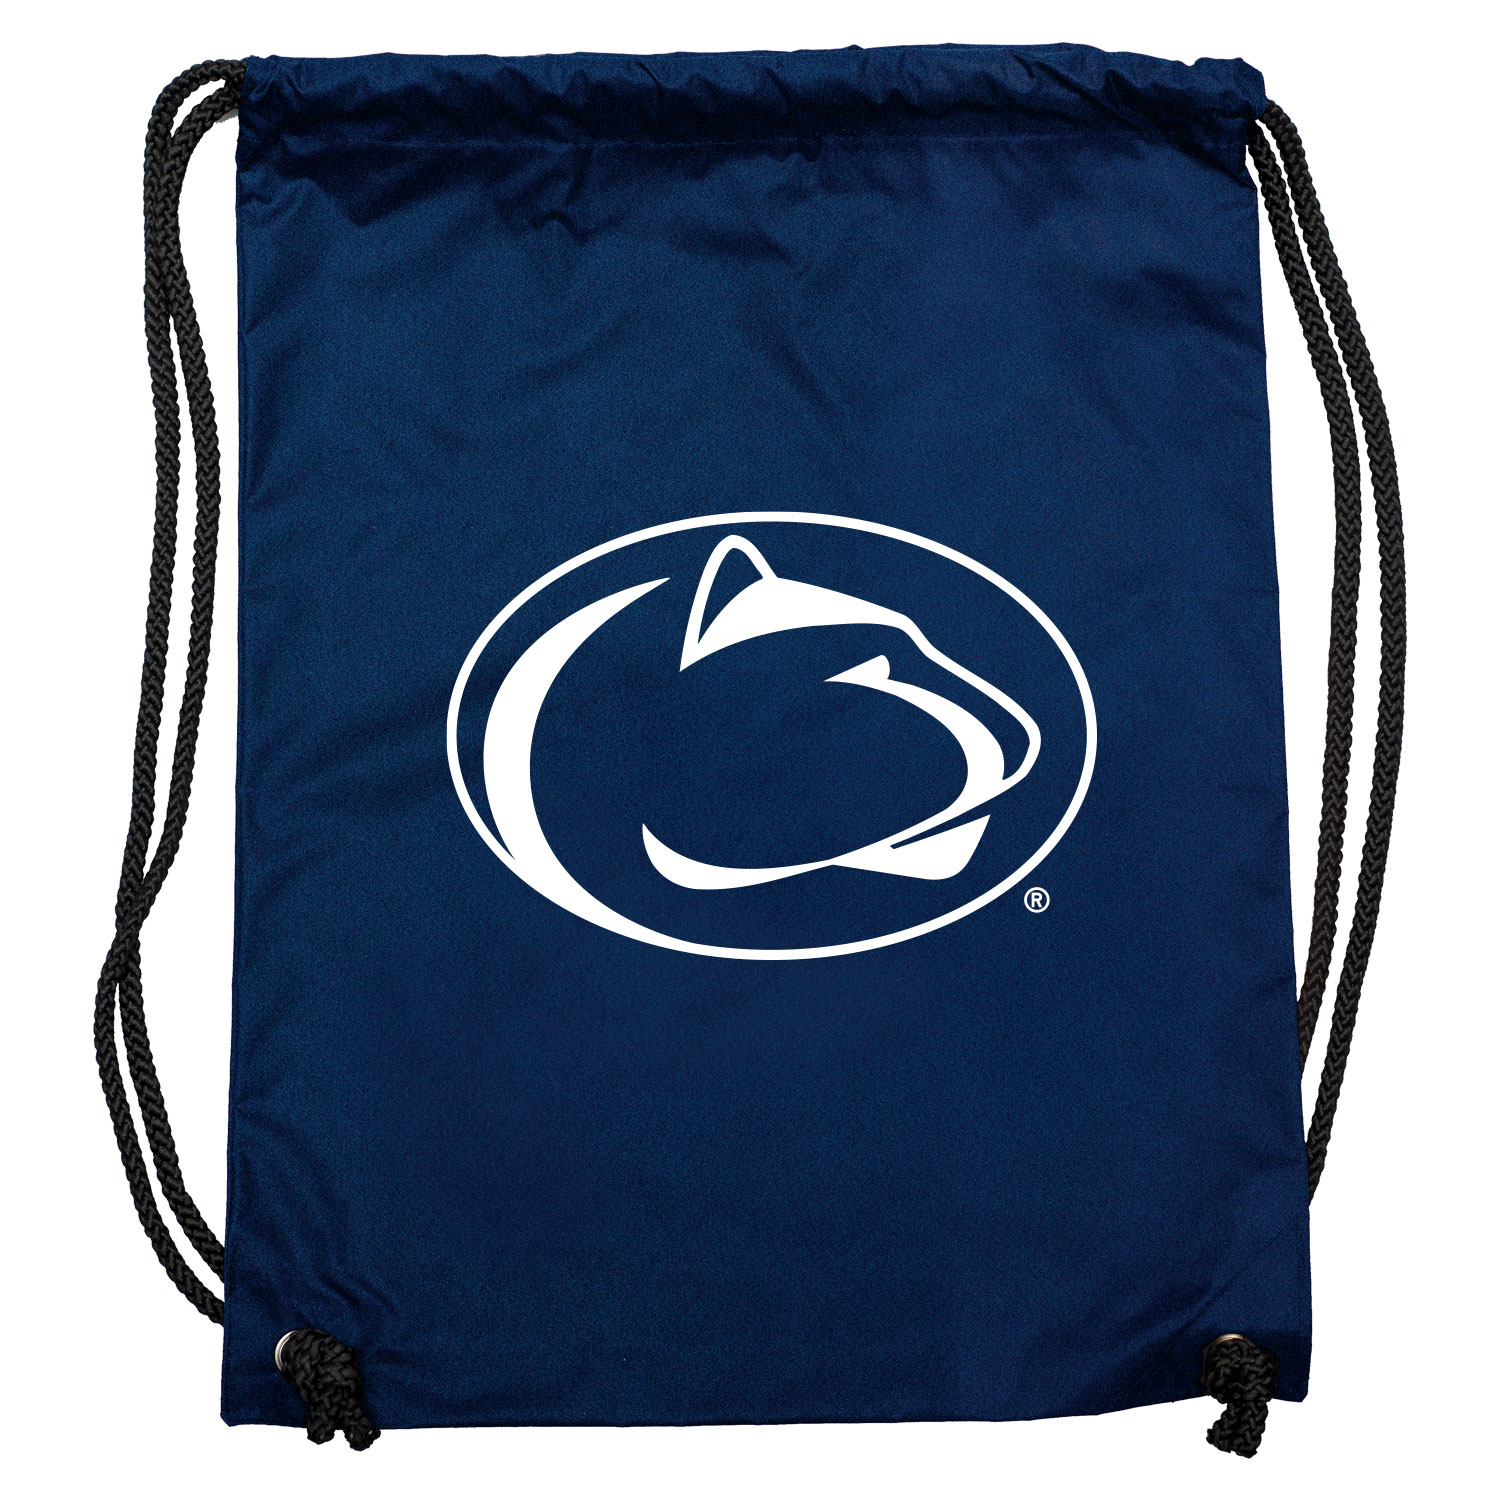 Marquette Draw String Backsack